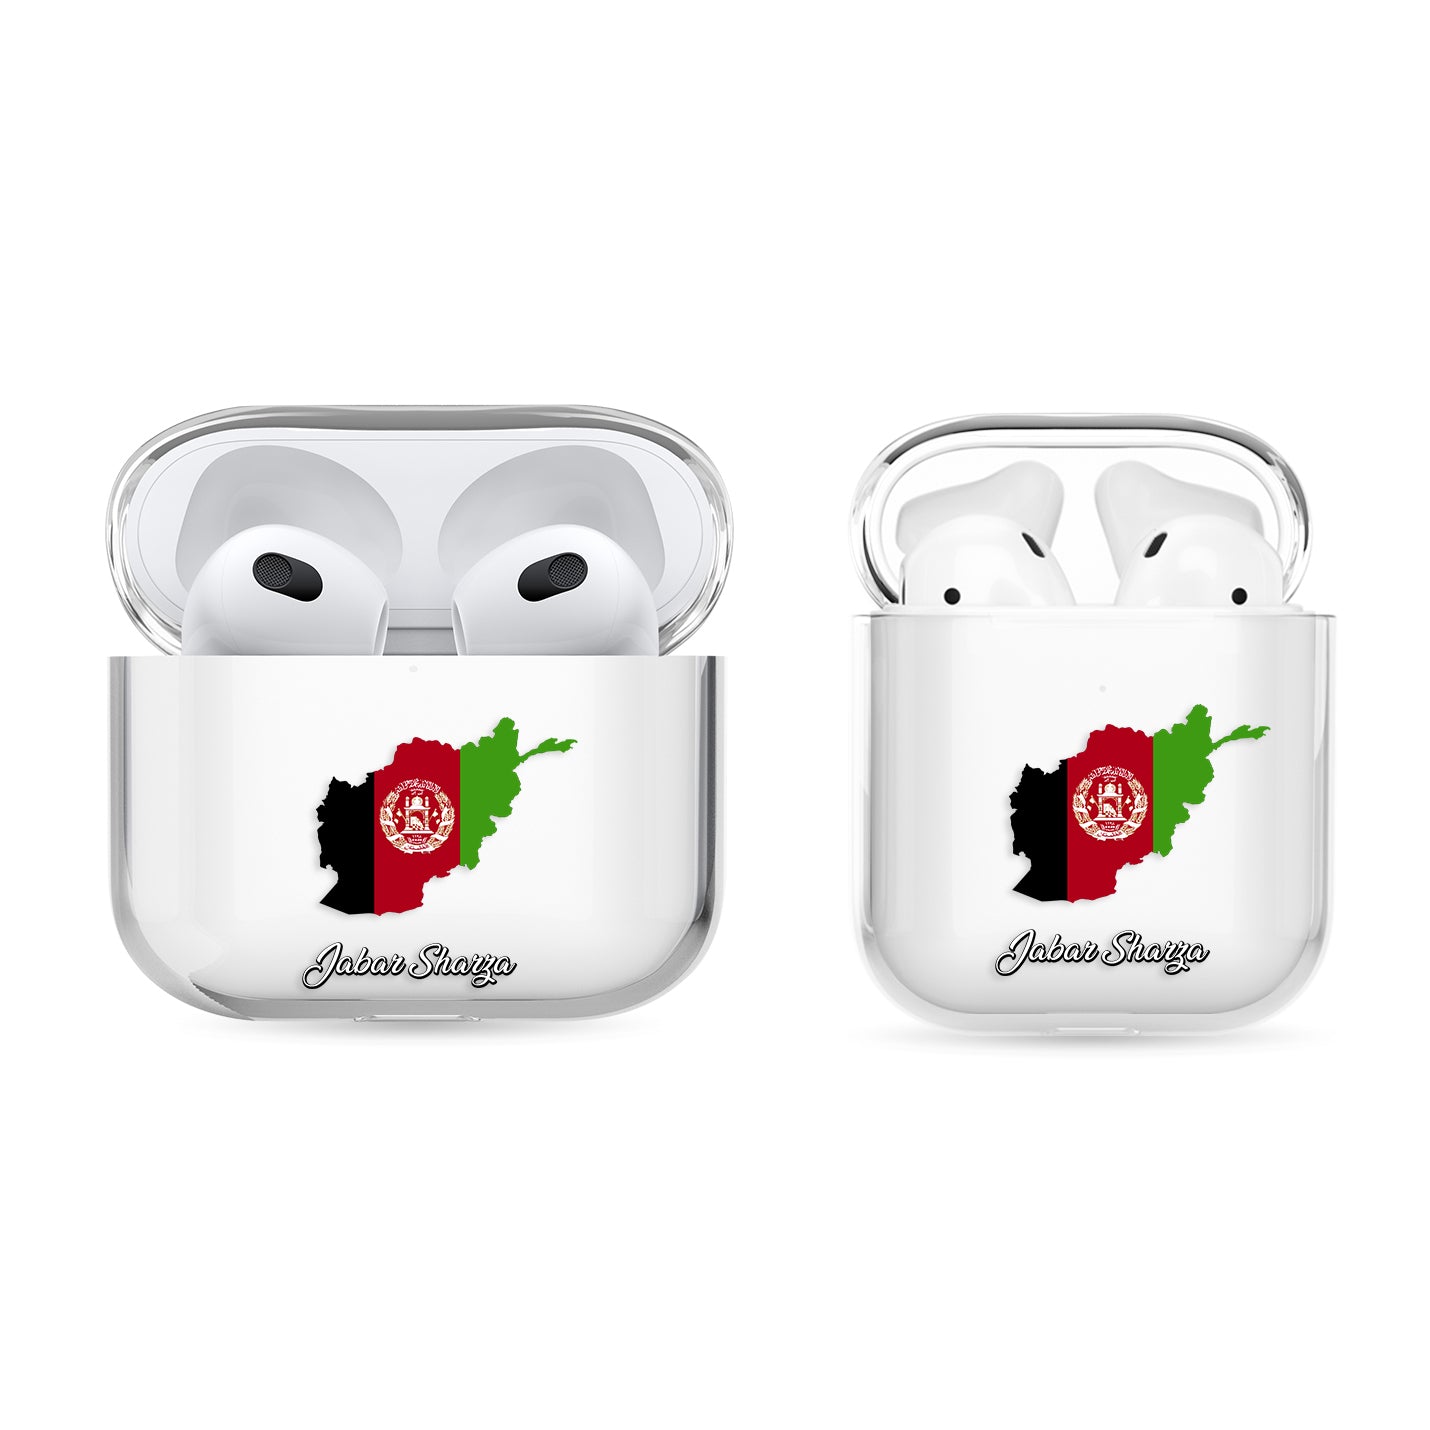 Airpods Hülle - Afghanistan Flagge - 1instaphone